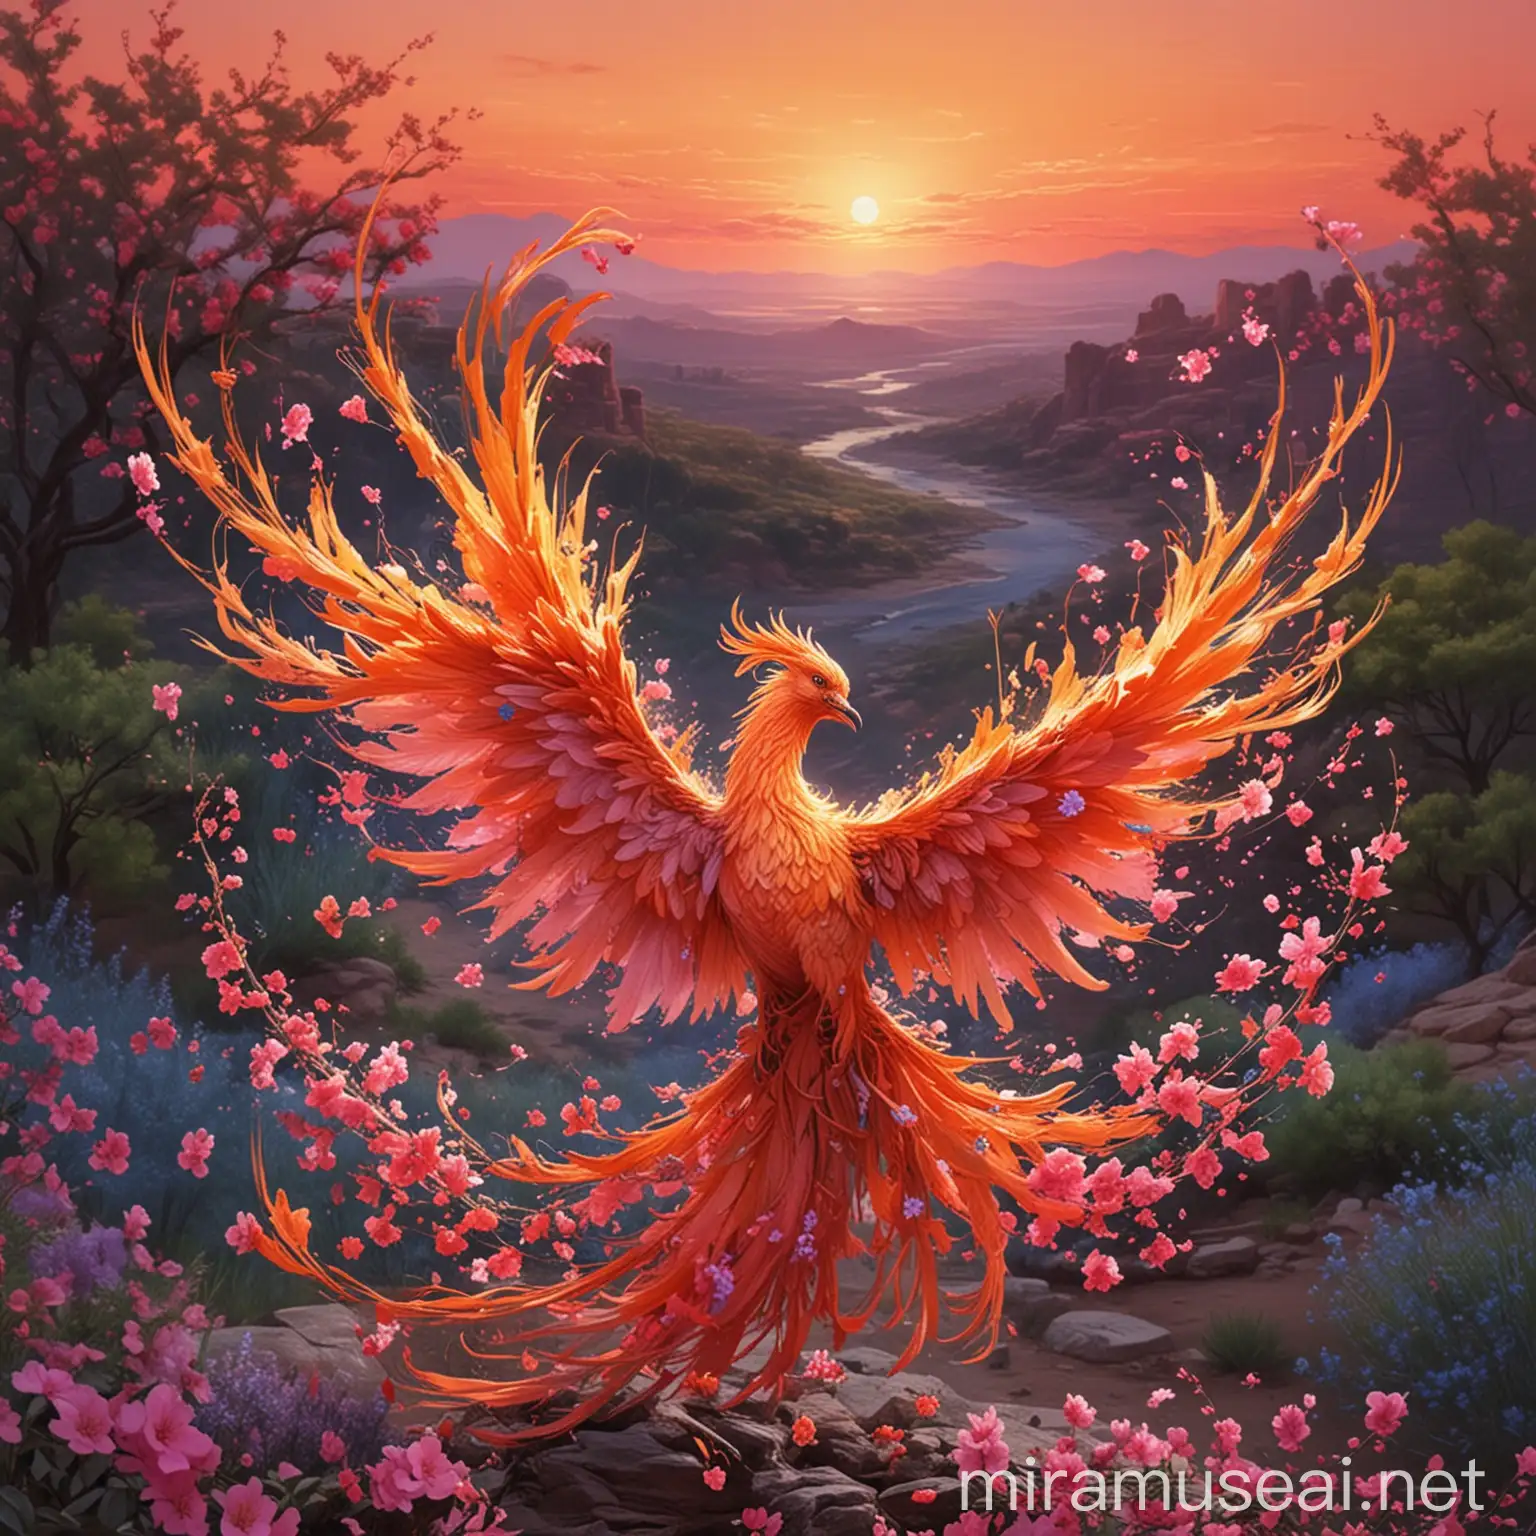 type: Phoenix_Blossom
name: "Phoenix Blossom: Transformation and Liberation"
description: |
    A beautiful and abstract image of a phoenix blooming from its ashes, undergoing a graceful transformation, symbolizing the journey of addiction recovery.
properties:
    - state: Flight
    - environment: Serene Nature
    - colors:
        Phoenix: "#FF4500"  # Vibrant Orange
        Sky: "#87CEEB"  # Tranquil Sky Blue
        Surroundings: "#32CD32"  # Lush Lime Green
        Blossom: "#FF69B4"  # Delicate Hot Pink
        Recovery: "#4169E1"  # Royal Blue for Addiction Recovery Symbol
    - theme: Transformation and Liberation from Addiction
    - message: A symbol of hope and motivation, inspiring individuals to embark on a new path in life and break free from the chains of addiction.
    - social_supporters:
        - Phoenix: "Local Support Group for Addiction Recovery" # Vibrant Orange (#FF4500)
        - Sky: "Rehabilitation Center focused on Eco-Therapy" # Tranquil Sky Blue (#87CEEB)
        - Surroundings: "Community Outreach Program promoting Green Initiatives" # Lush Lime Green (#32CD32)
        - Blossom: "Holistic Therapist specializing in Addiction Counseling" # Delicate Hot Pink (#FF69B4)
